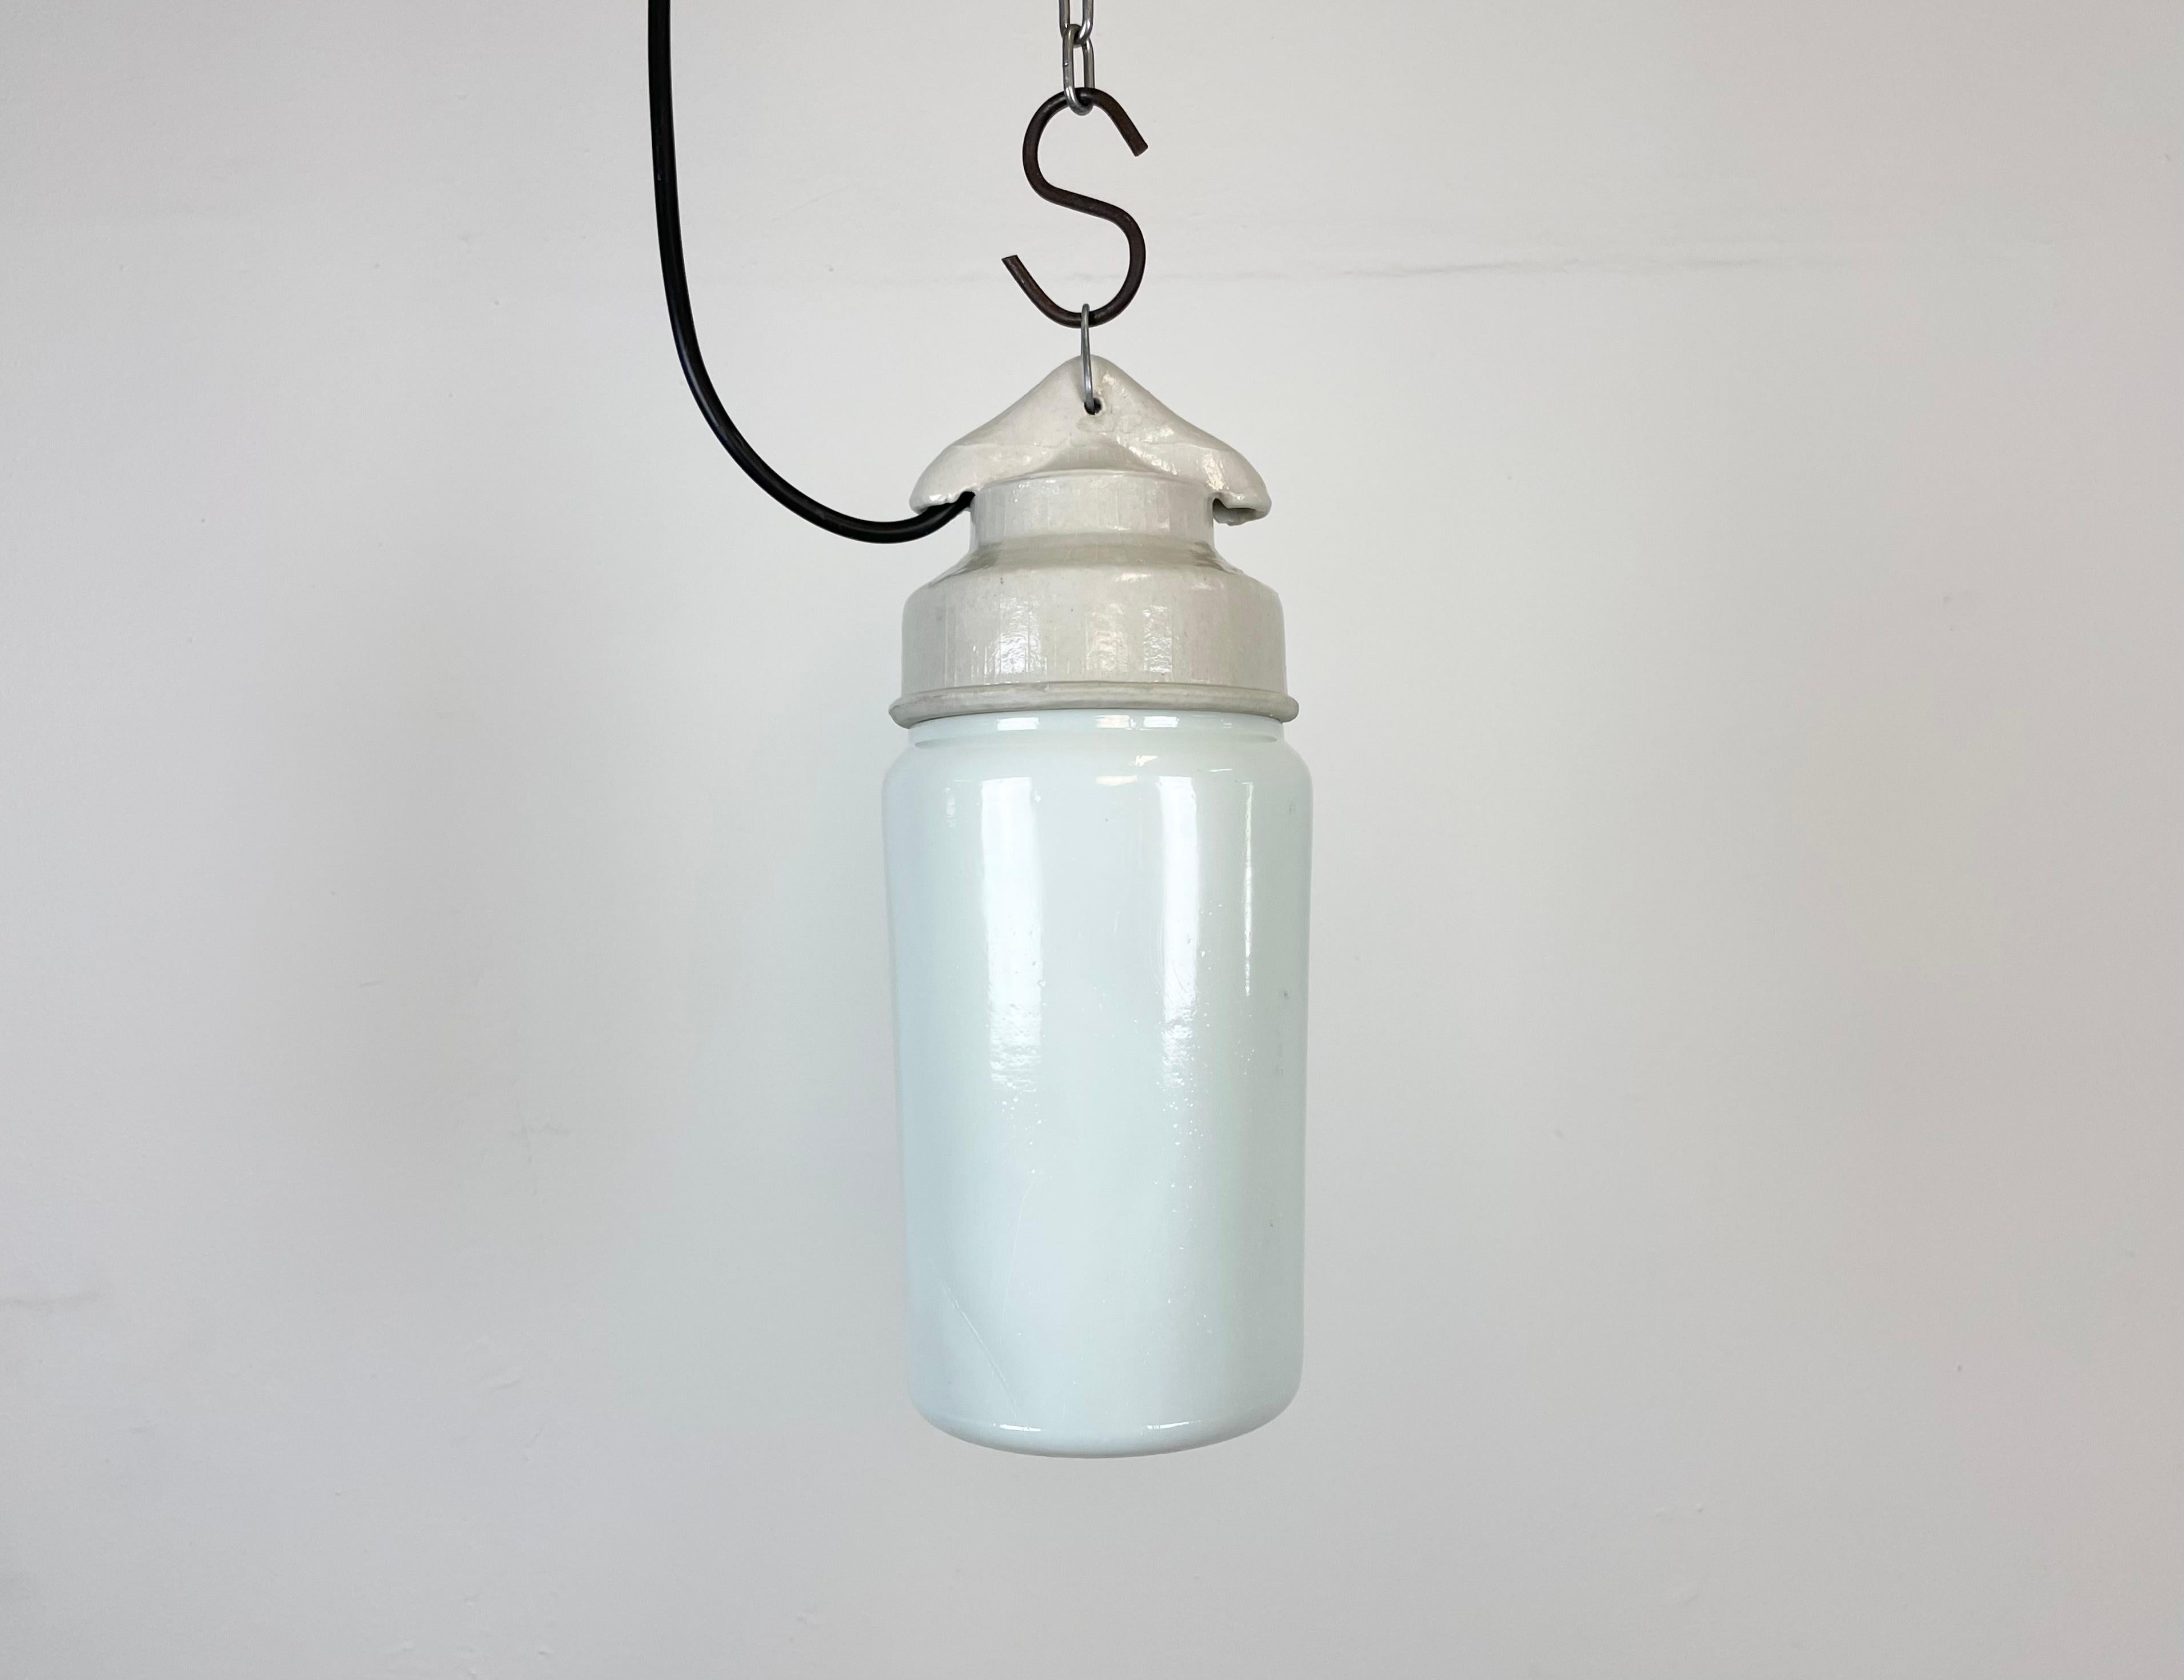 Vintage industrial light made in former Soviet Union during the 1970s.It features a white porcelain top and a milk glass cover. The socket requires E27 light bulbs. New wire. The weight of the lamp is 1kg.